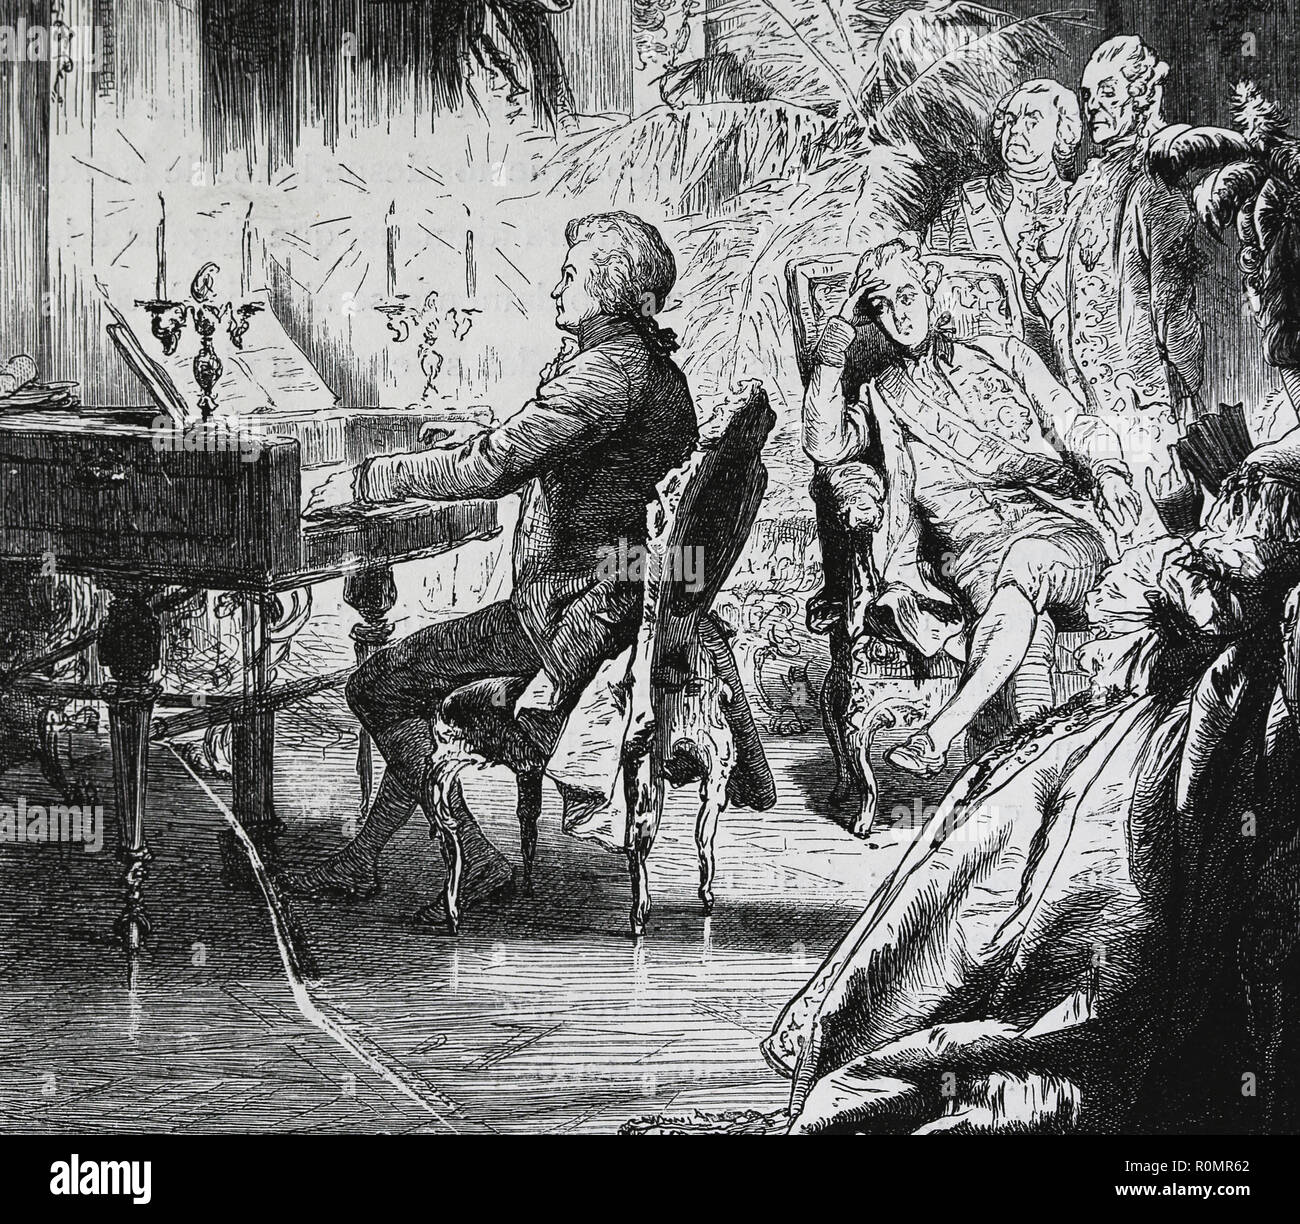 Mozart (1756-1791) playing the piano with the imperial family (Joseph II, Holy Roman Emperor). Vienna. Engraving of Germania, 1882 Stock Photo